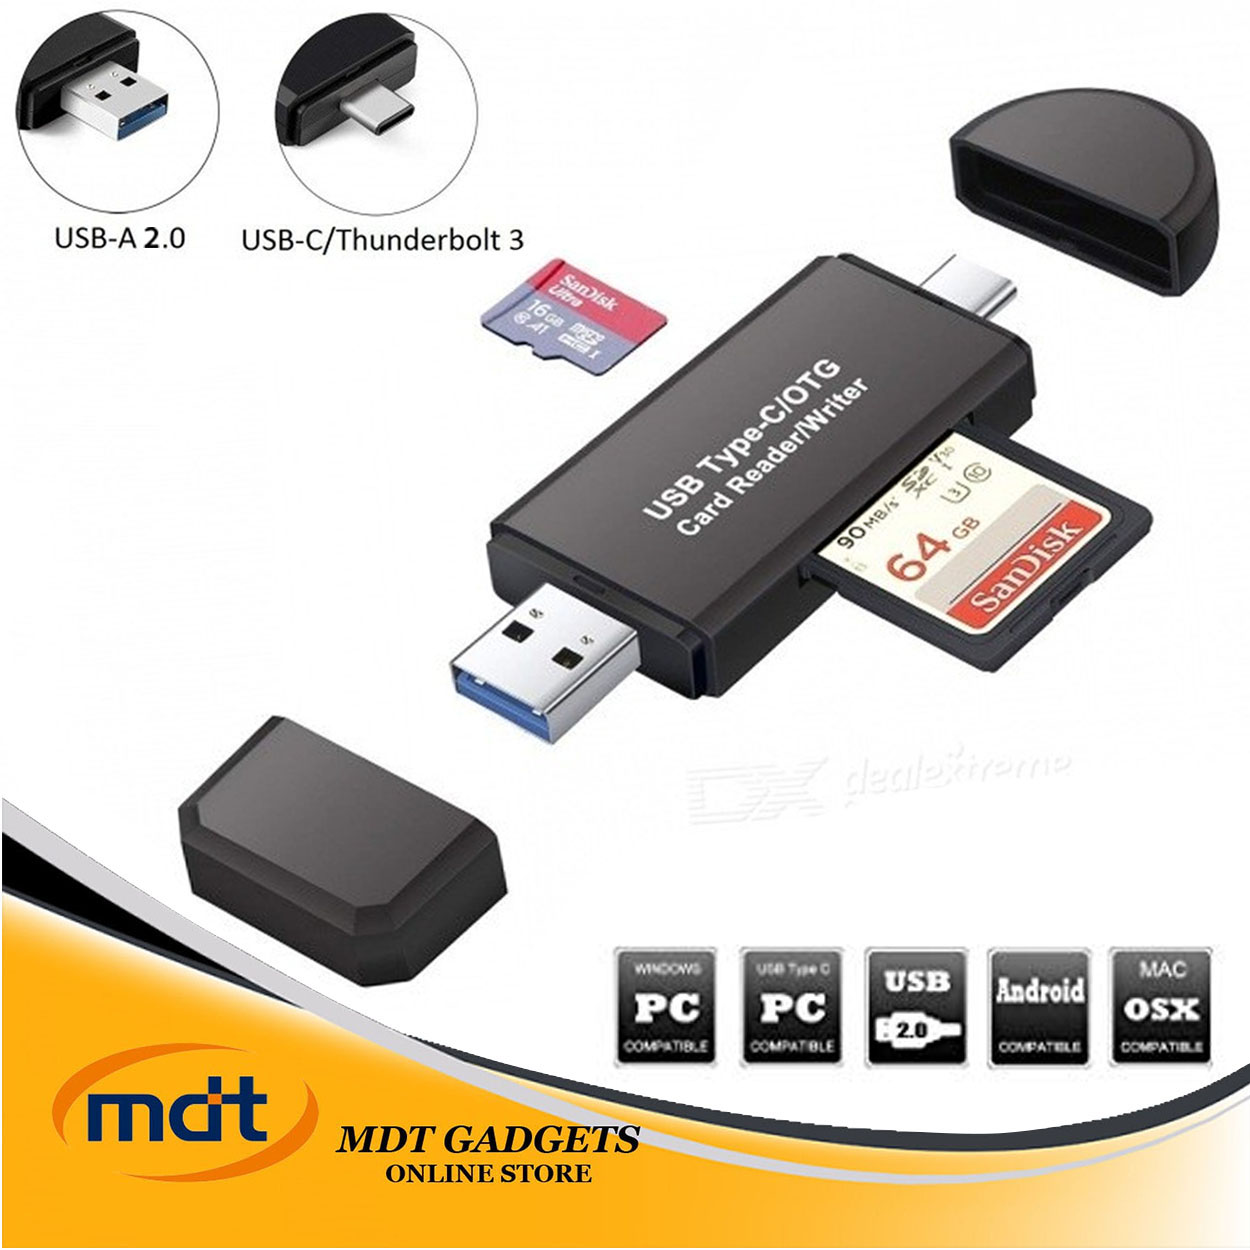 sd card writer for pc